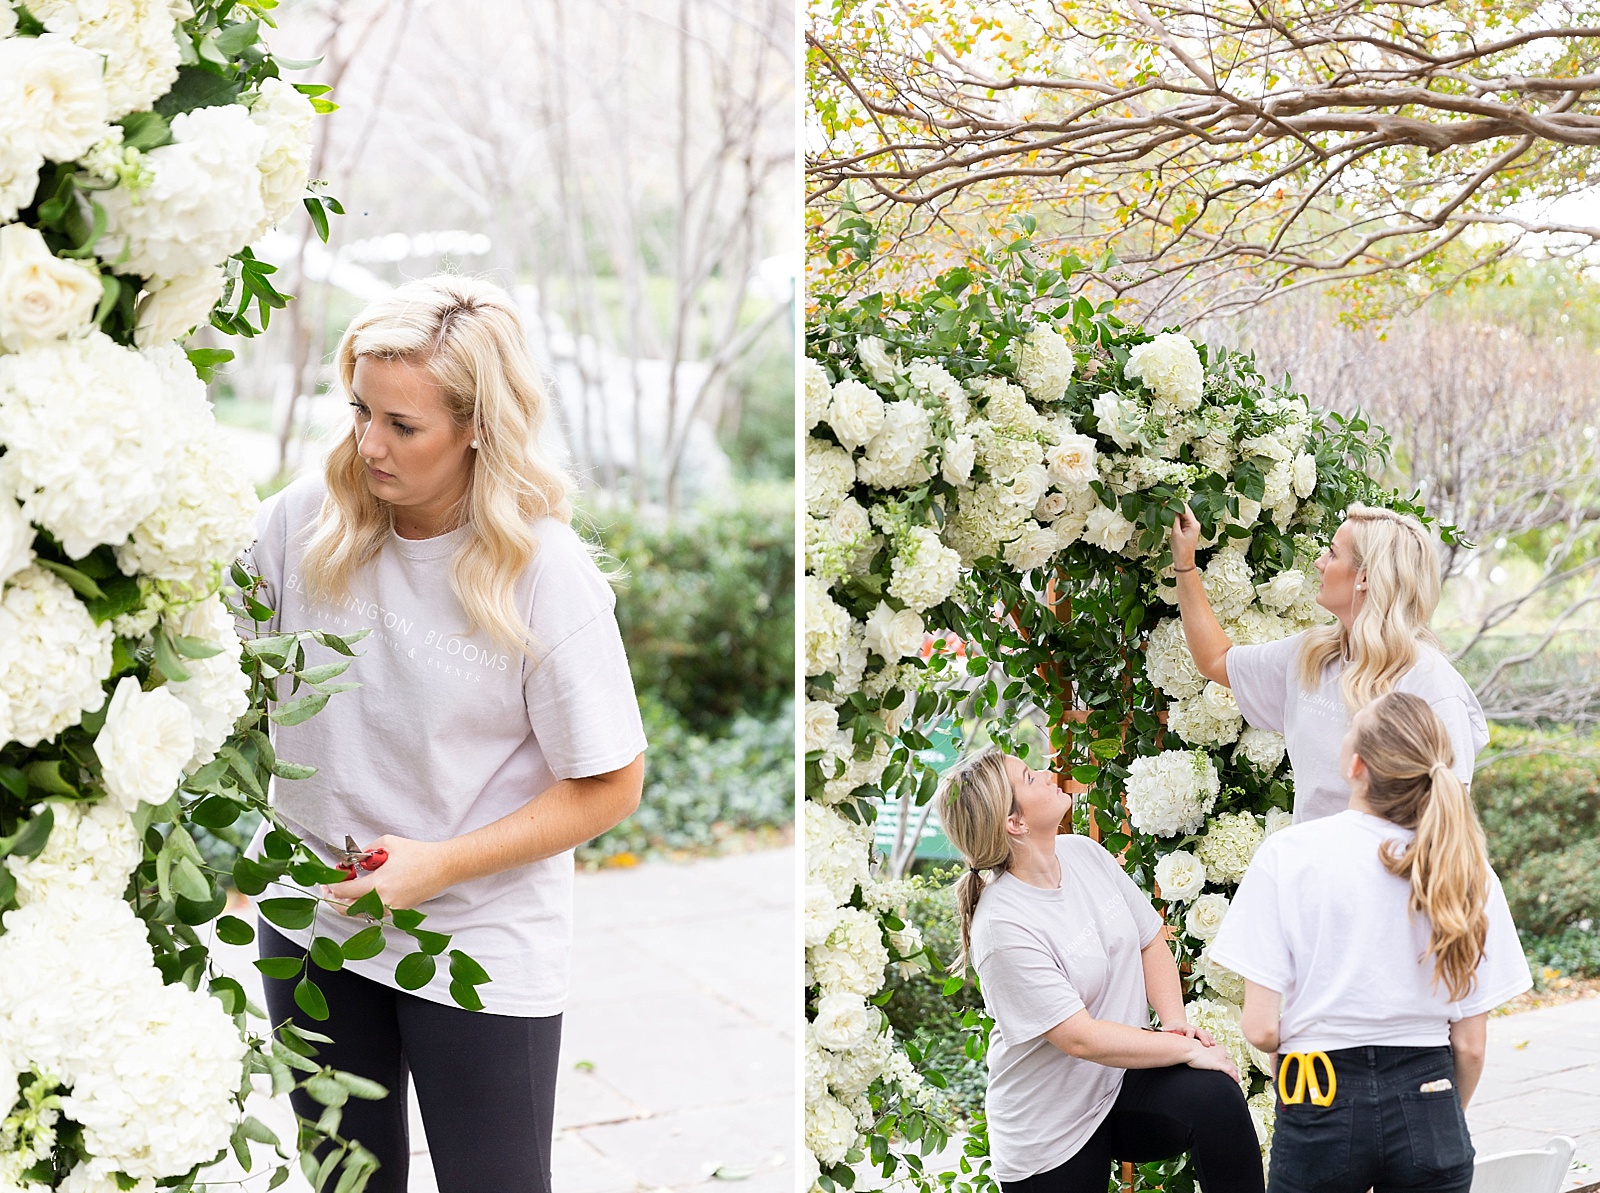 Blushington Blooms sets up floral arch photographed by Randi Michelle Photography